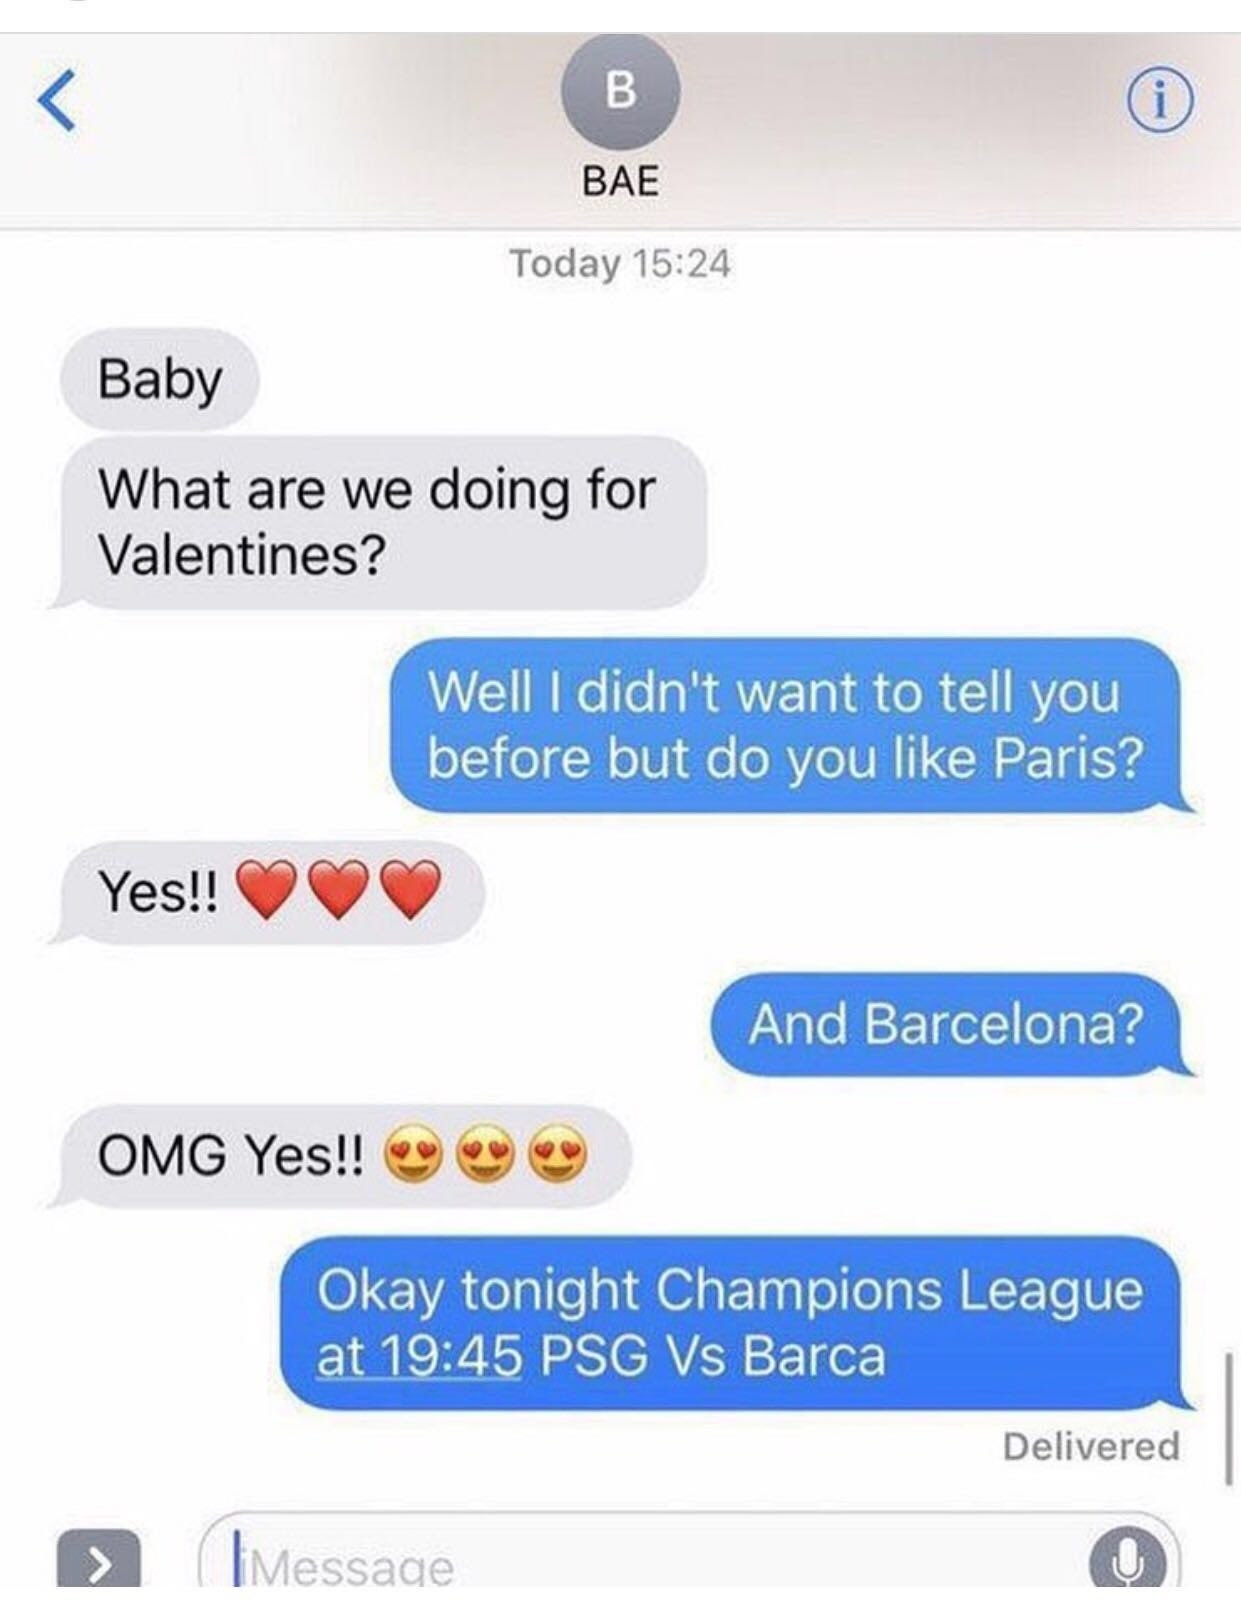 A text exchange where someone asks his bae if she likes Barcelona and Paris, she says yes, and then he responds with the time of the PSG vs Barca soccer match